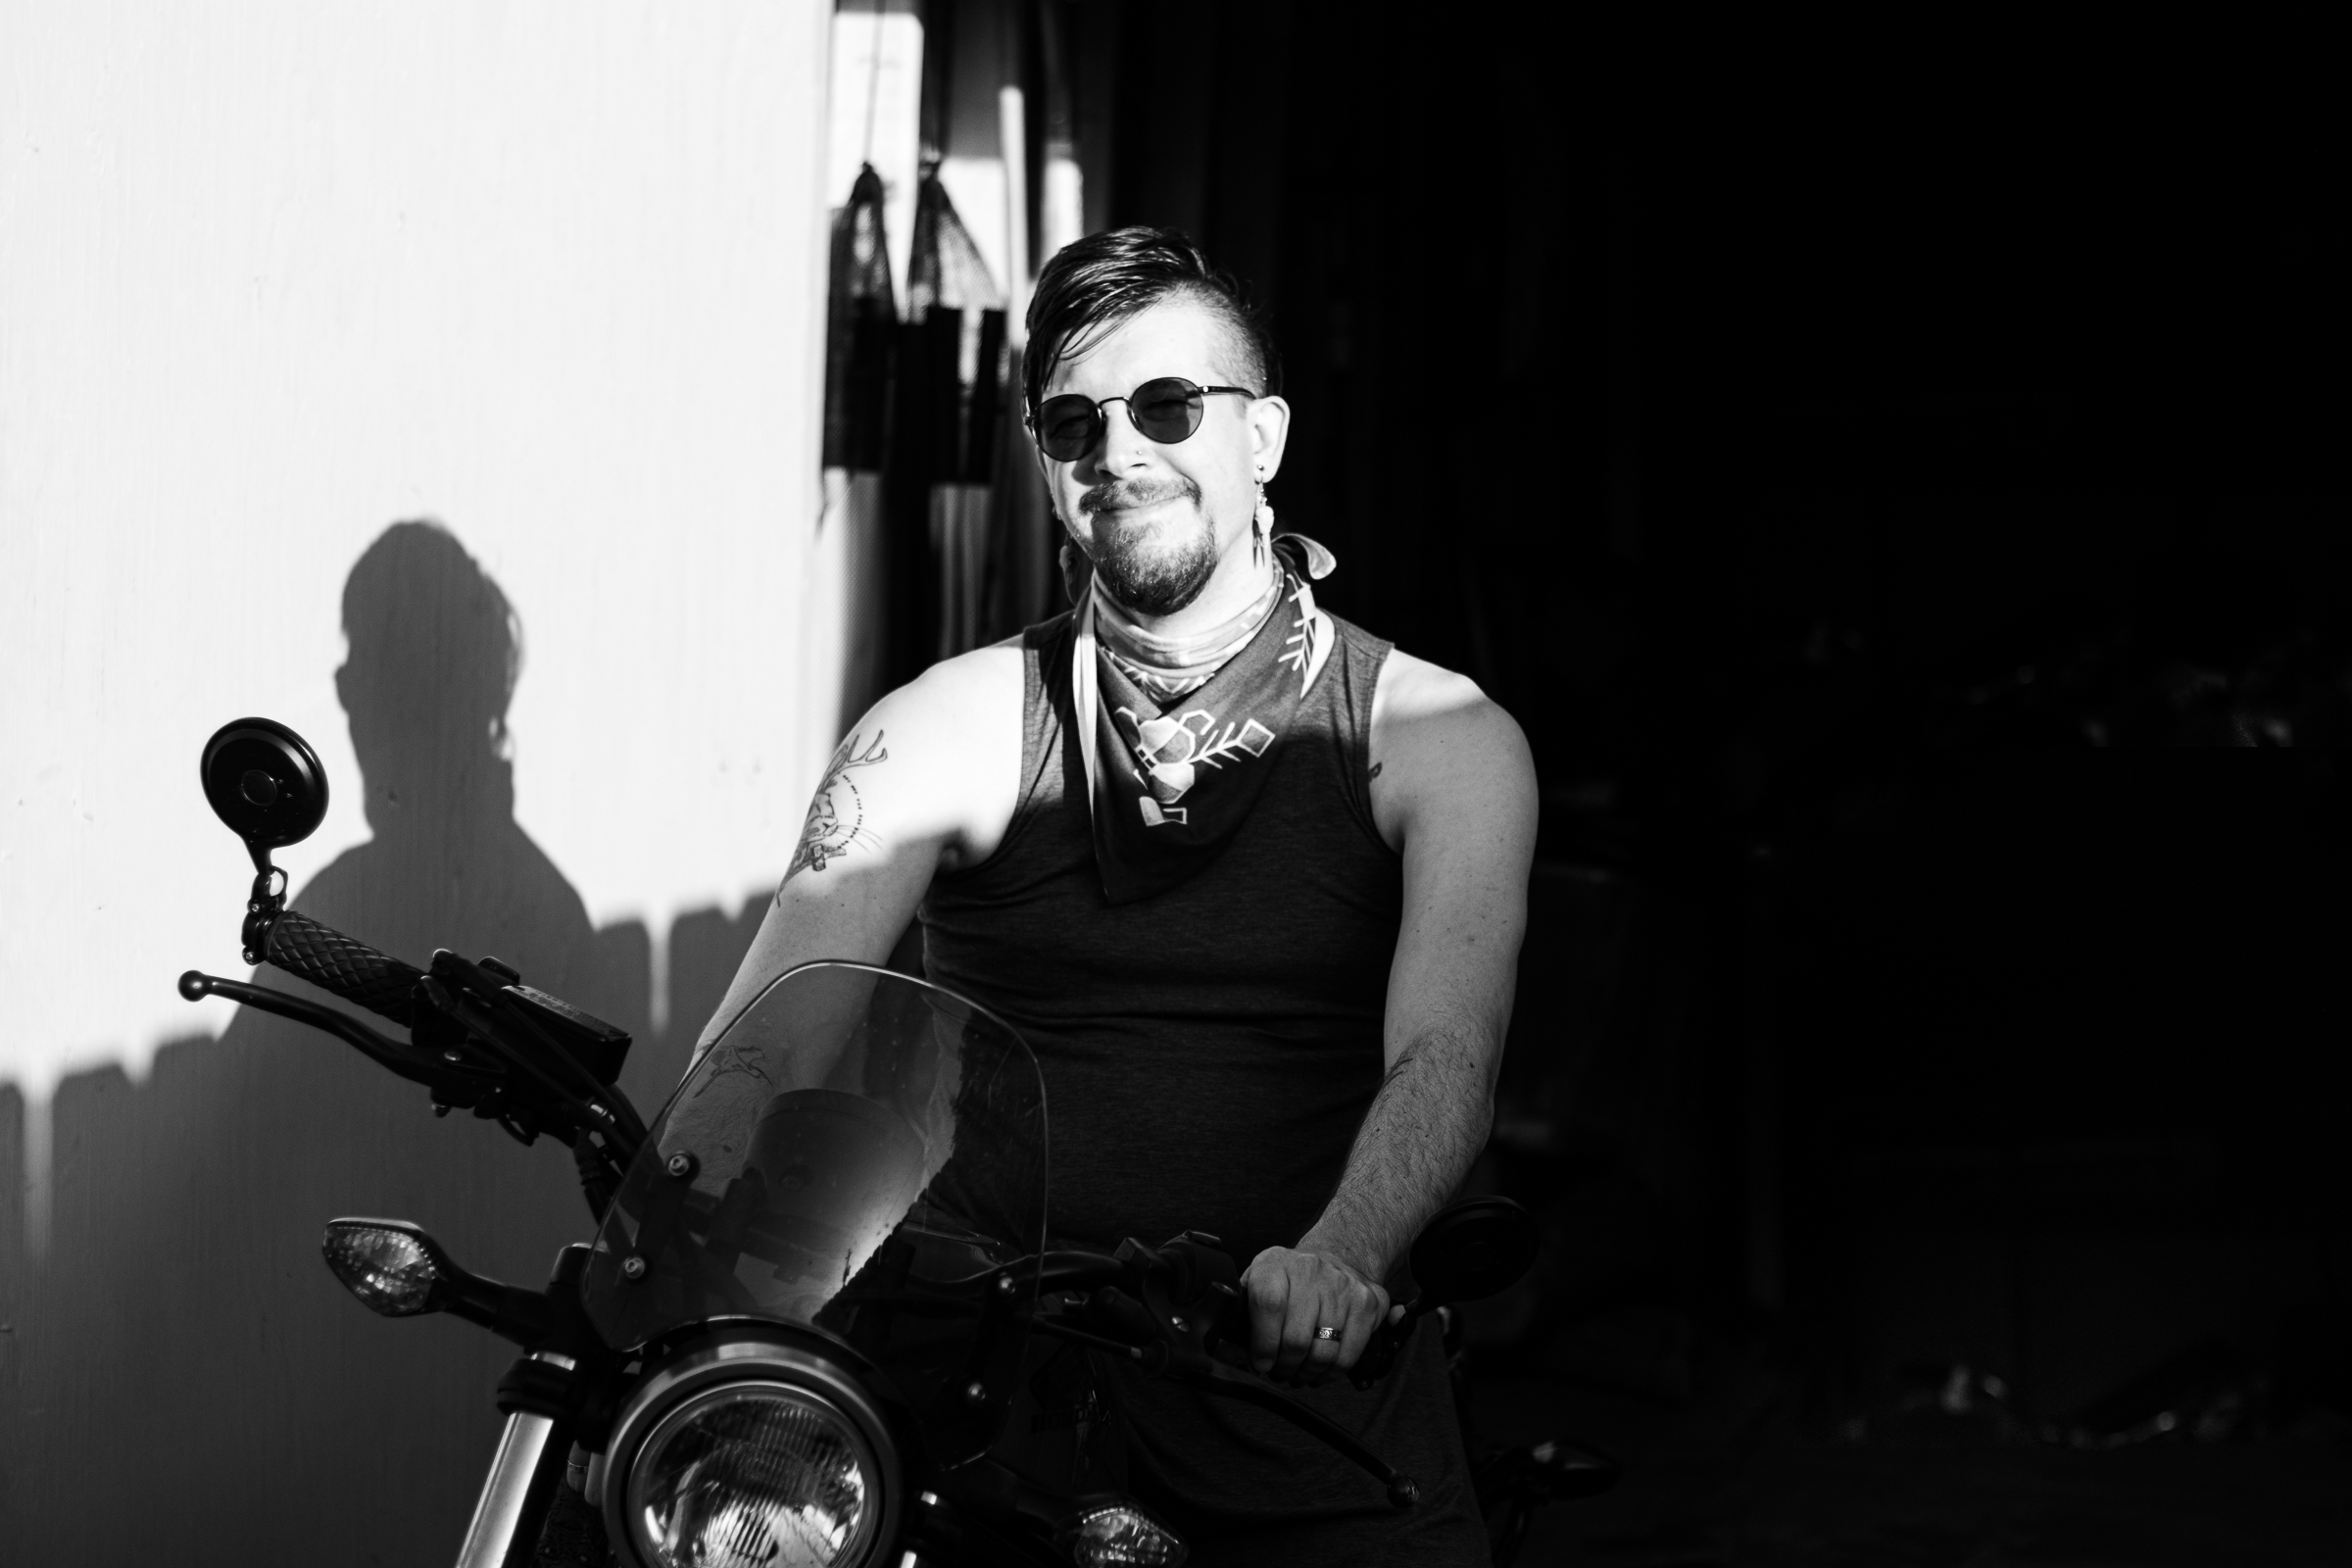 Black and white picture of Hilary wearing a sleeveless top, round dark glasses, dangly earrings, and a bandana. They have a short goatee and an undercut hairstyle, and they're smiling. They are sitting astride a motorcycle with a round headlight and a small windshield. They are in a ray of sunlight that cuts across their shoulders, casting a shadow on the white background to their left, while leaving the remaining two thirds of the backdrop dark and featureless.